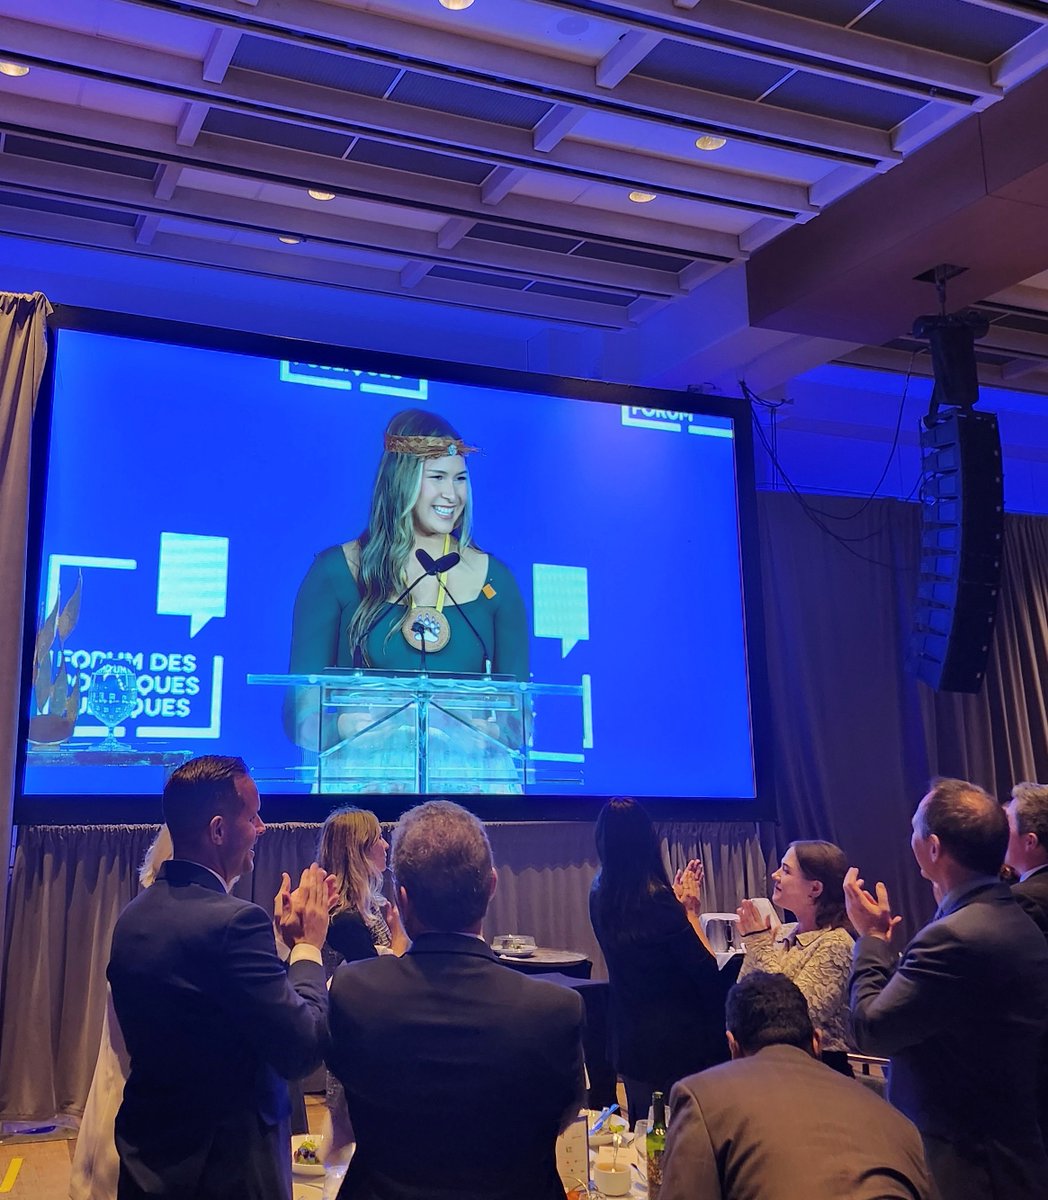 We were honoured to support @templescott client, @Moose_Hide, as @RavenLacerte received @ppforumca's Emerging Leader Award. Her speech moved the audience to tears. Thank you to the PPF for an excellent event. We are so proud of you Raven!! #cdnpoli